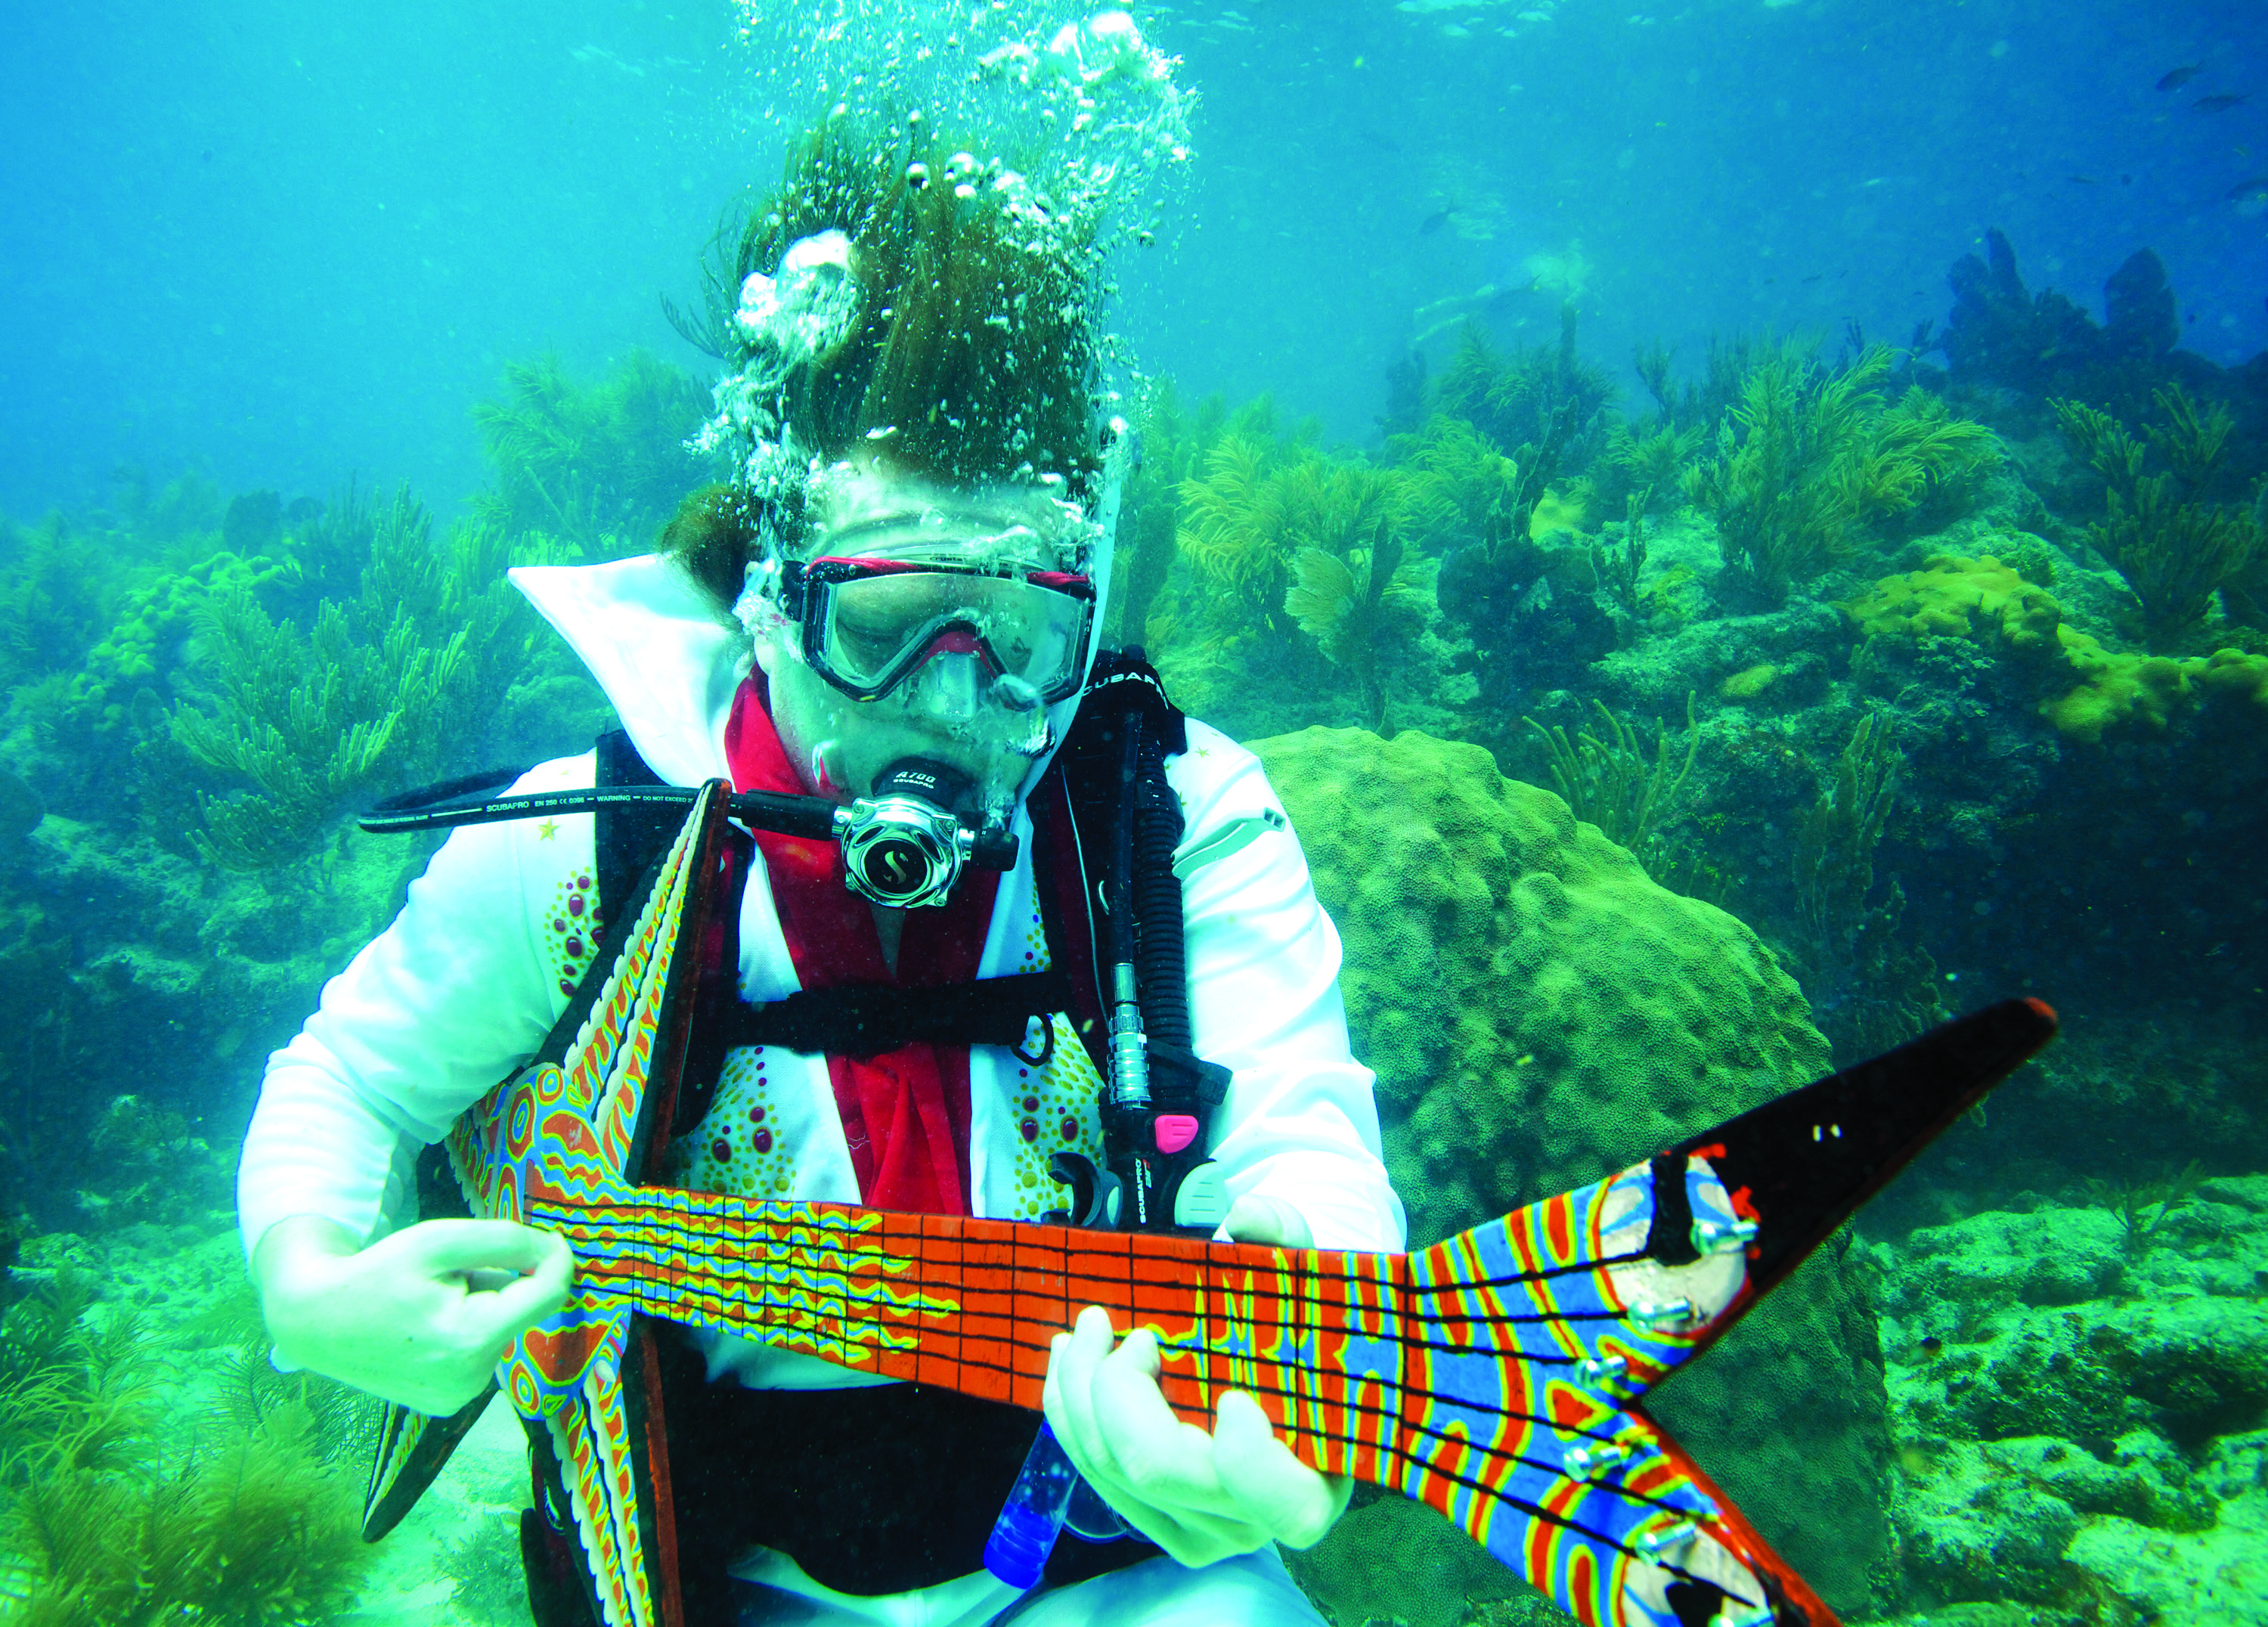 Fins Up! The 36th Annual Underwater Music Festival DESTINATION